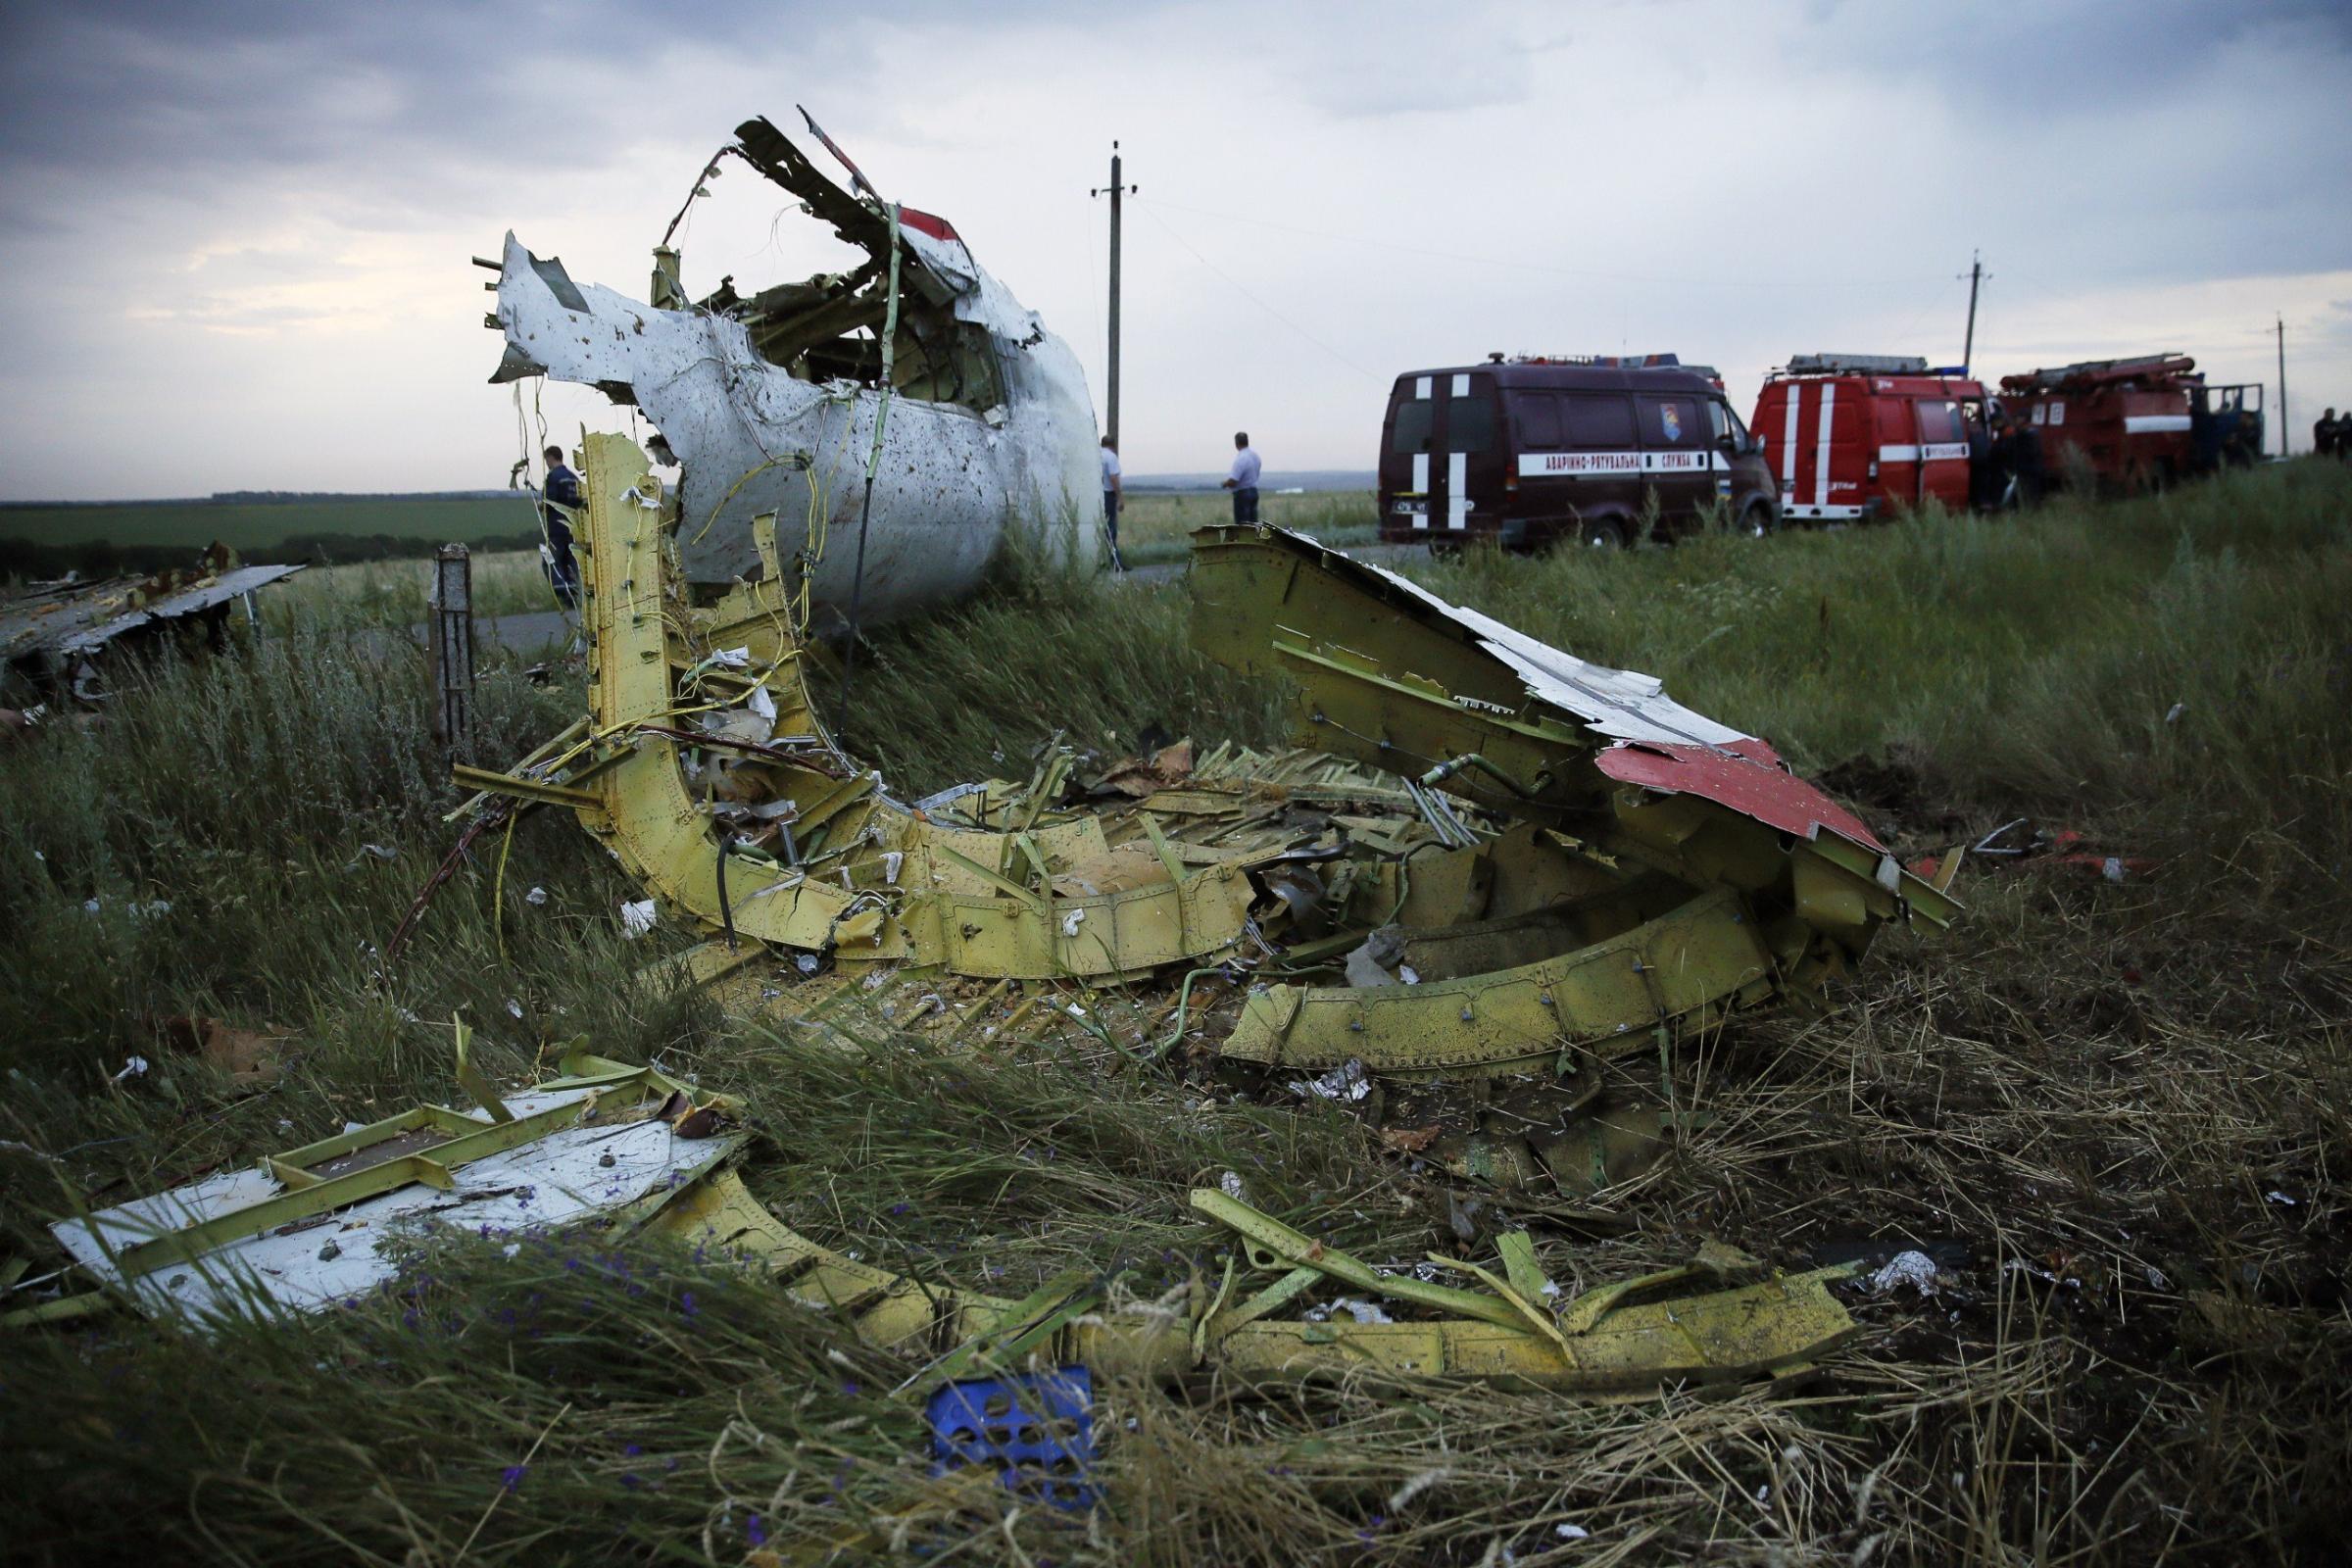 The wreckage of the Malaysian airliner carrying 295 people from Amsterdam to Kuala Lumpur after it crashed on July 17, 2014 near the town of Shaktarsk, in rebel-held east Ukraine.